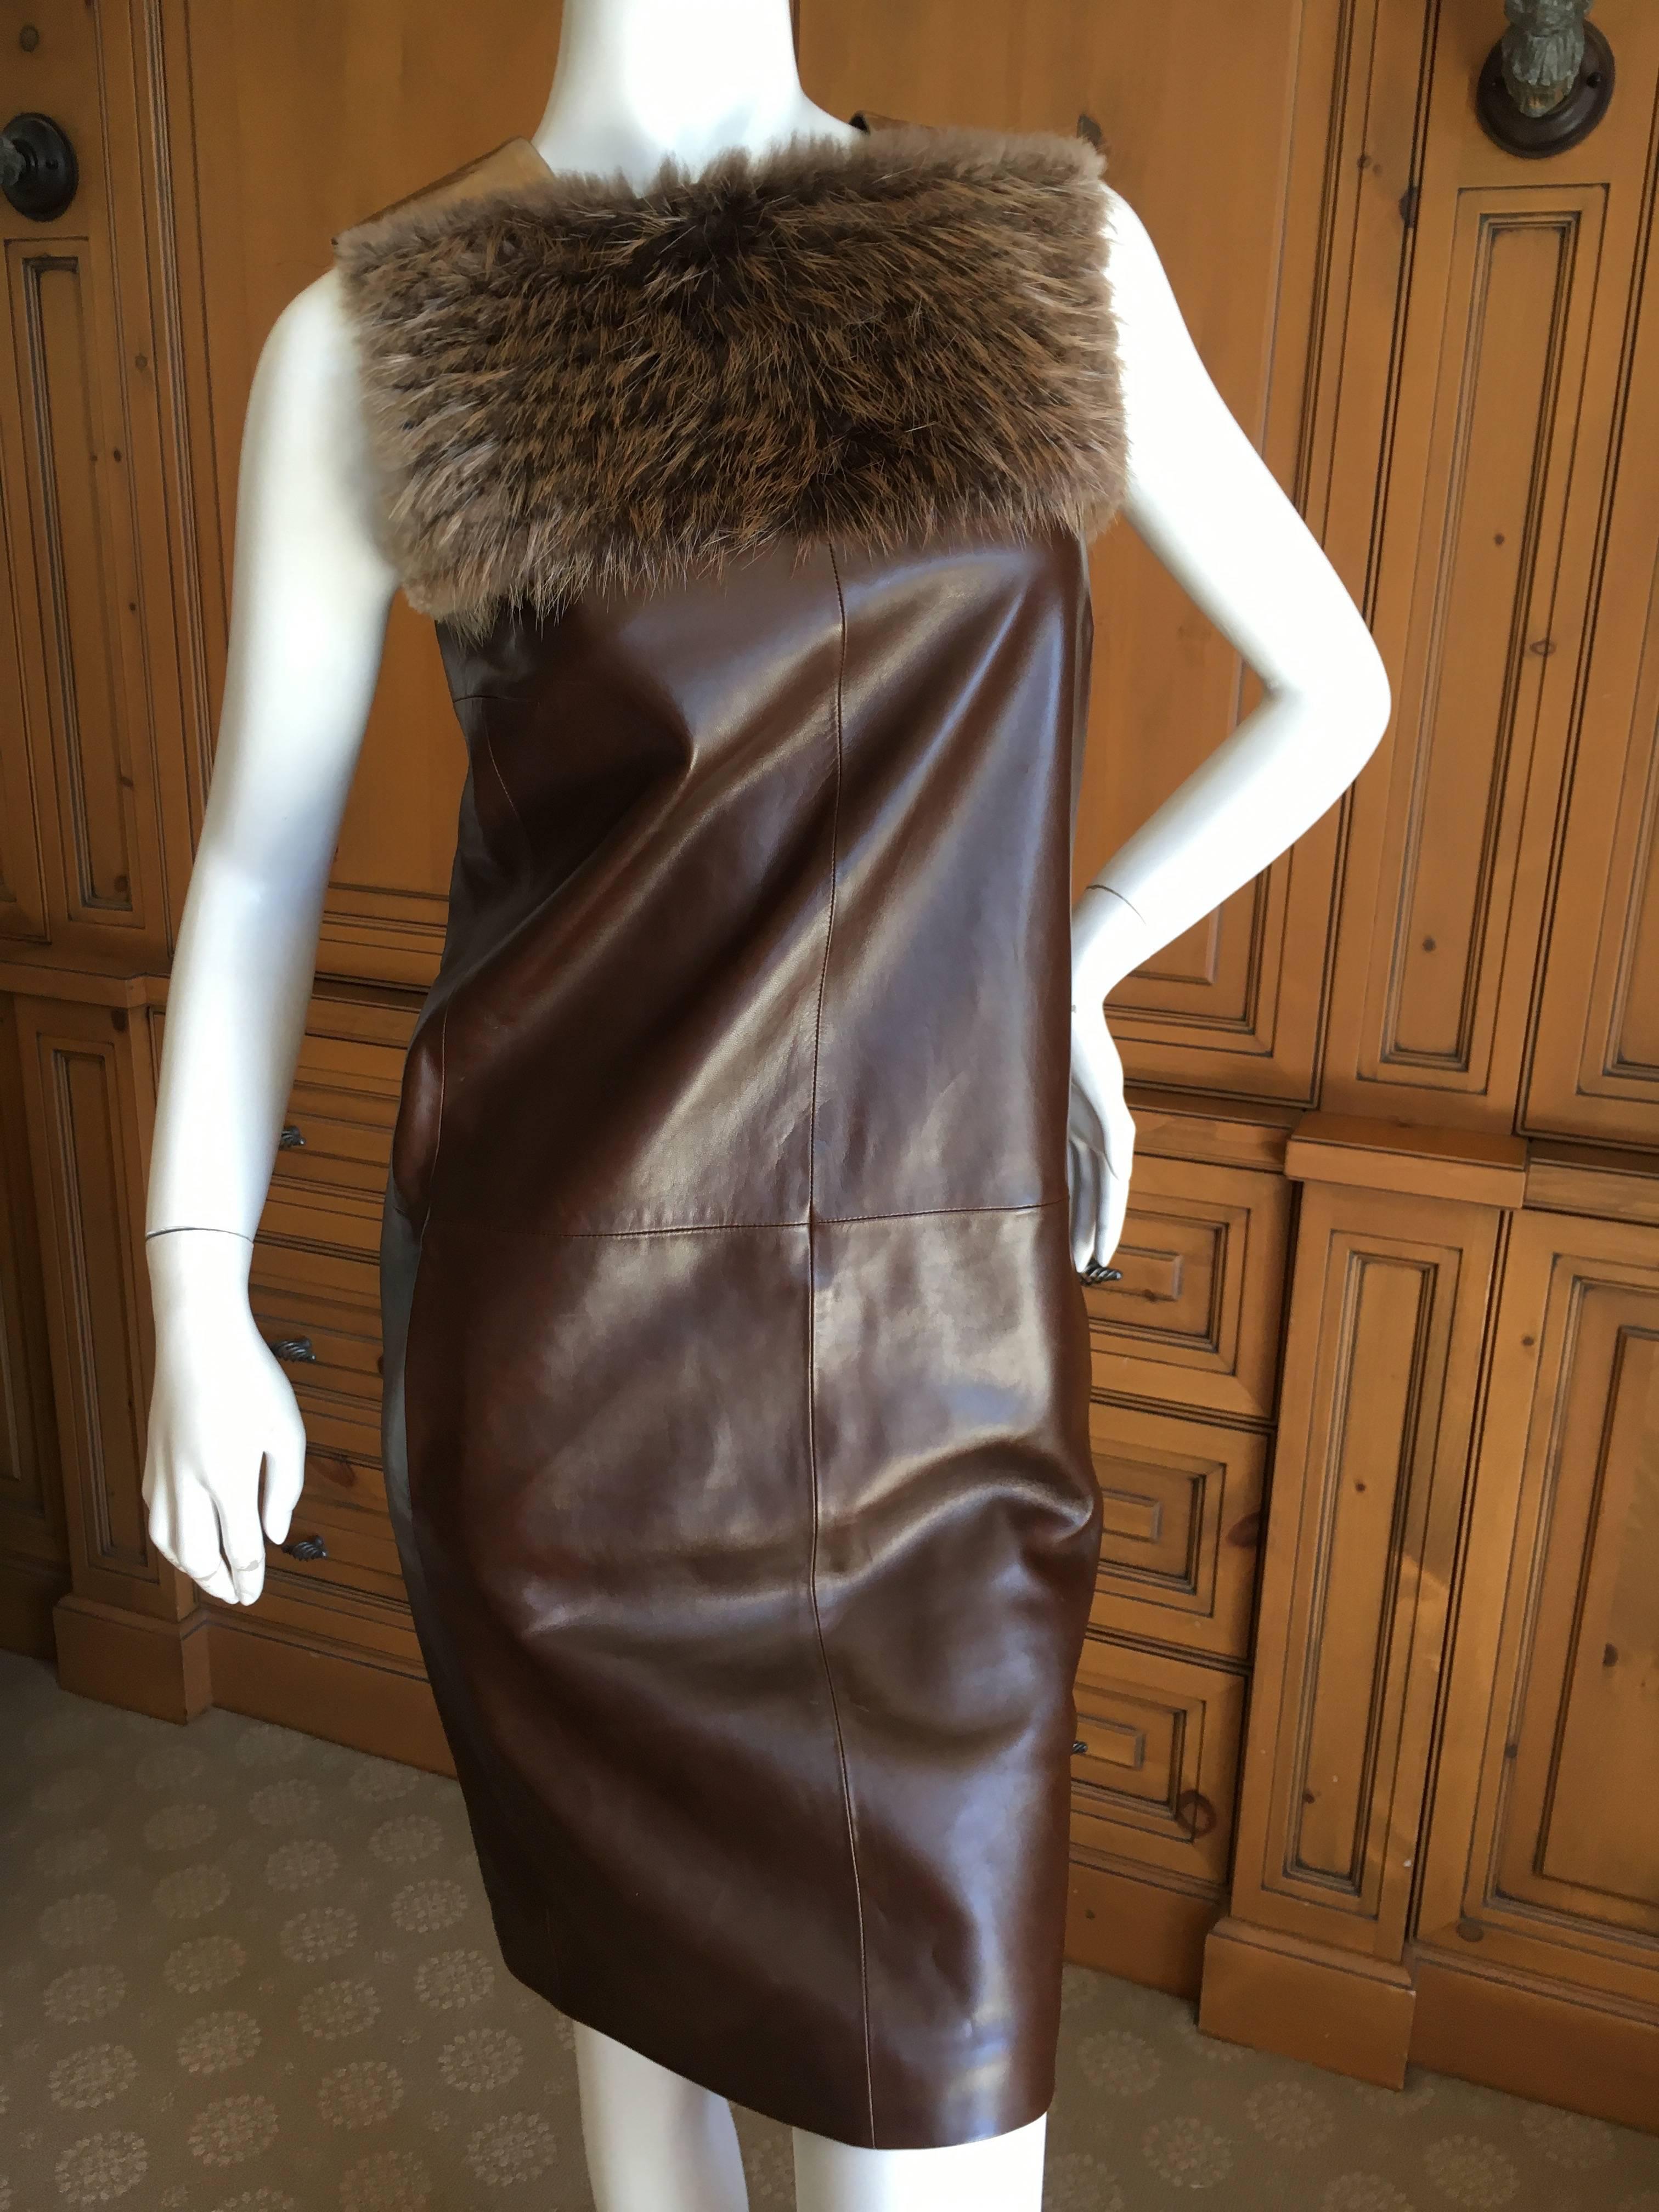 Gucci Brown and Gold Leather Sleeveless Shift Dress with Fur Trim.
Size 38
Bust 36